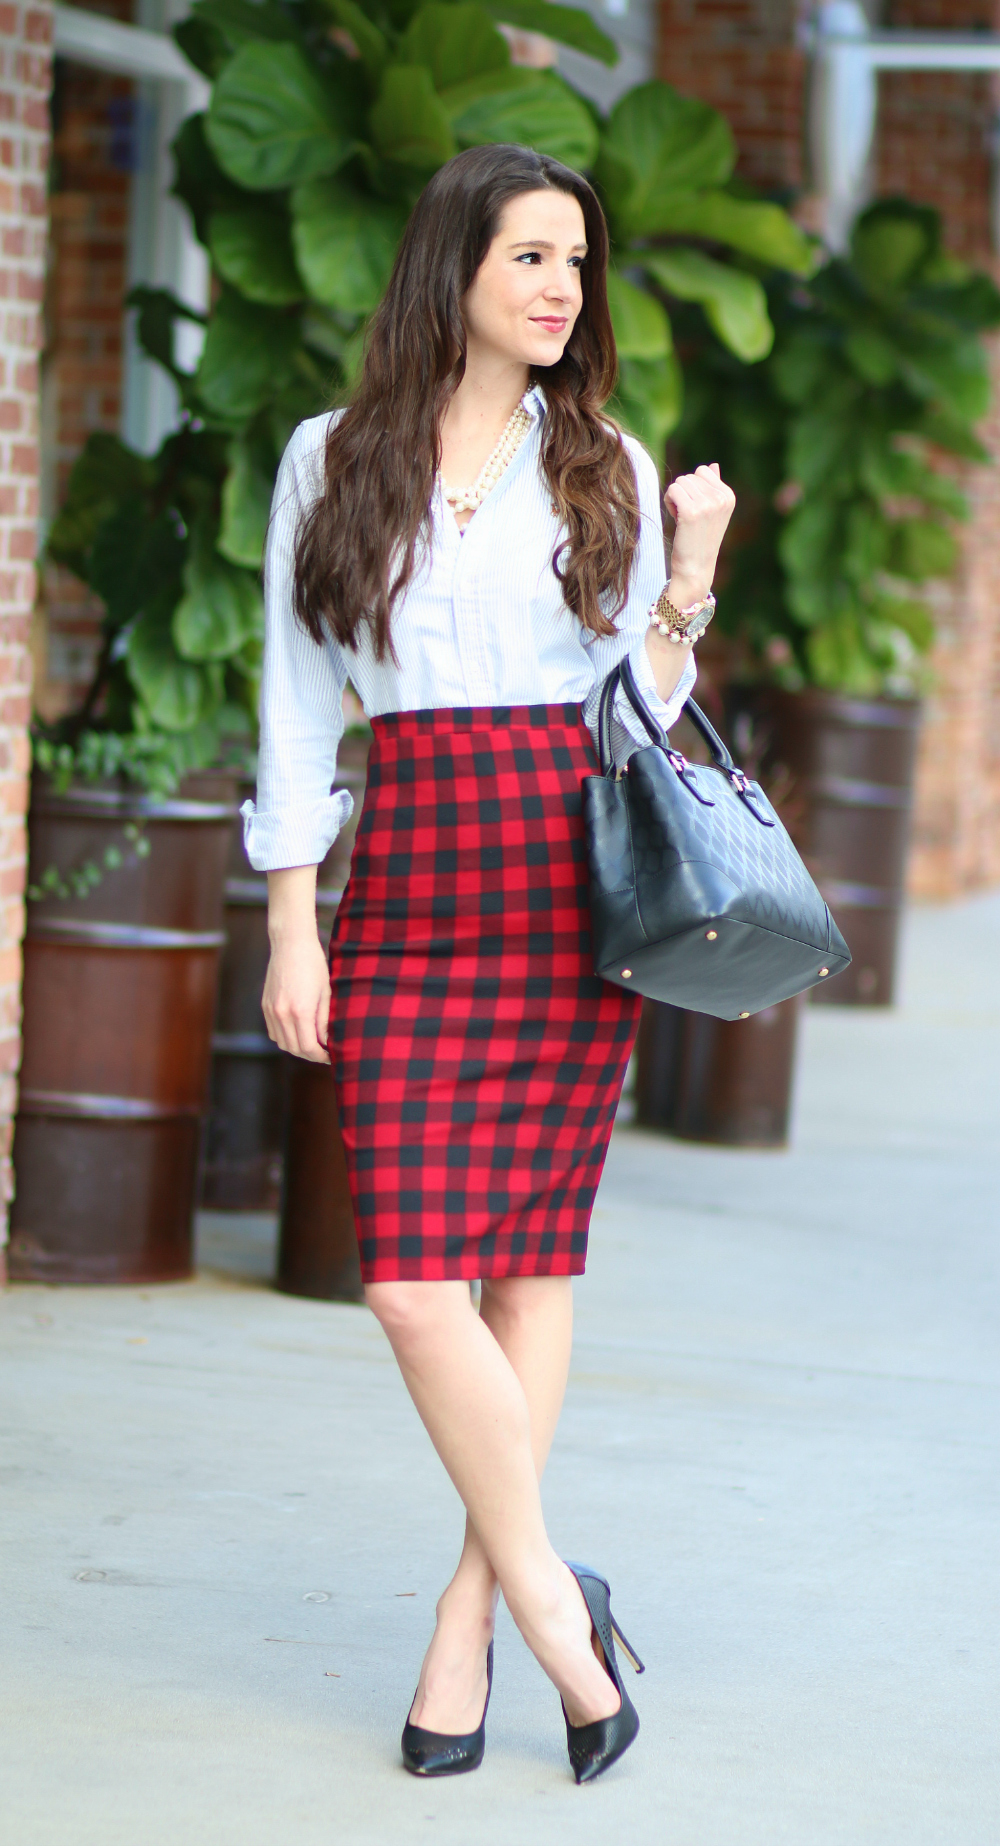 Red Plaid Pencil Skirt, Preppy Pencil Skirt, Plaid Pencil Skirt, St. Ives Oatmeal, St. Ives Radiance Boost Bowl, St. Ives Nourish & Soothe Oatmeal & Shea Butter Body Lotion, St. Ives Nourished & Smooth Oatmeal Body Scrub,